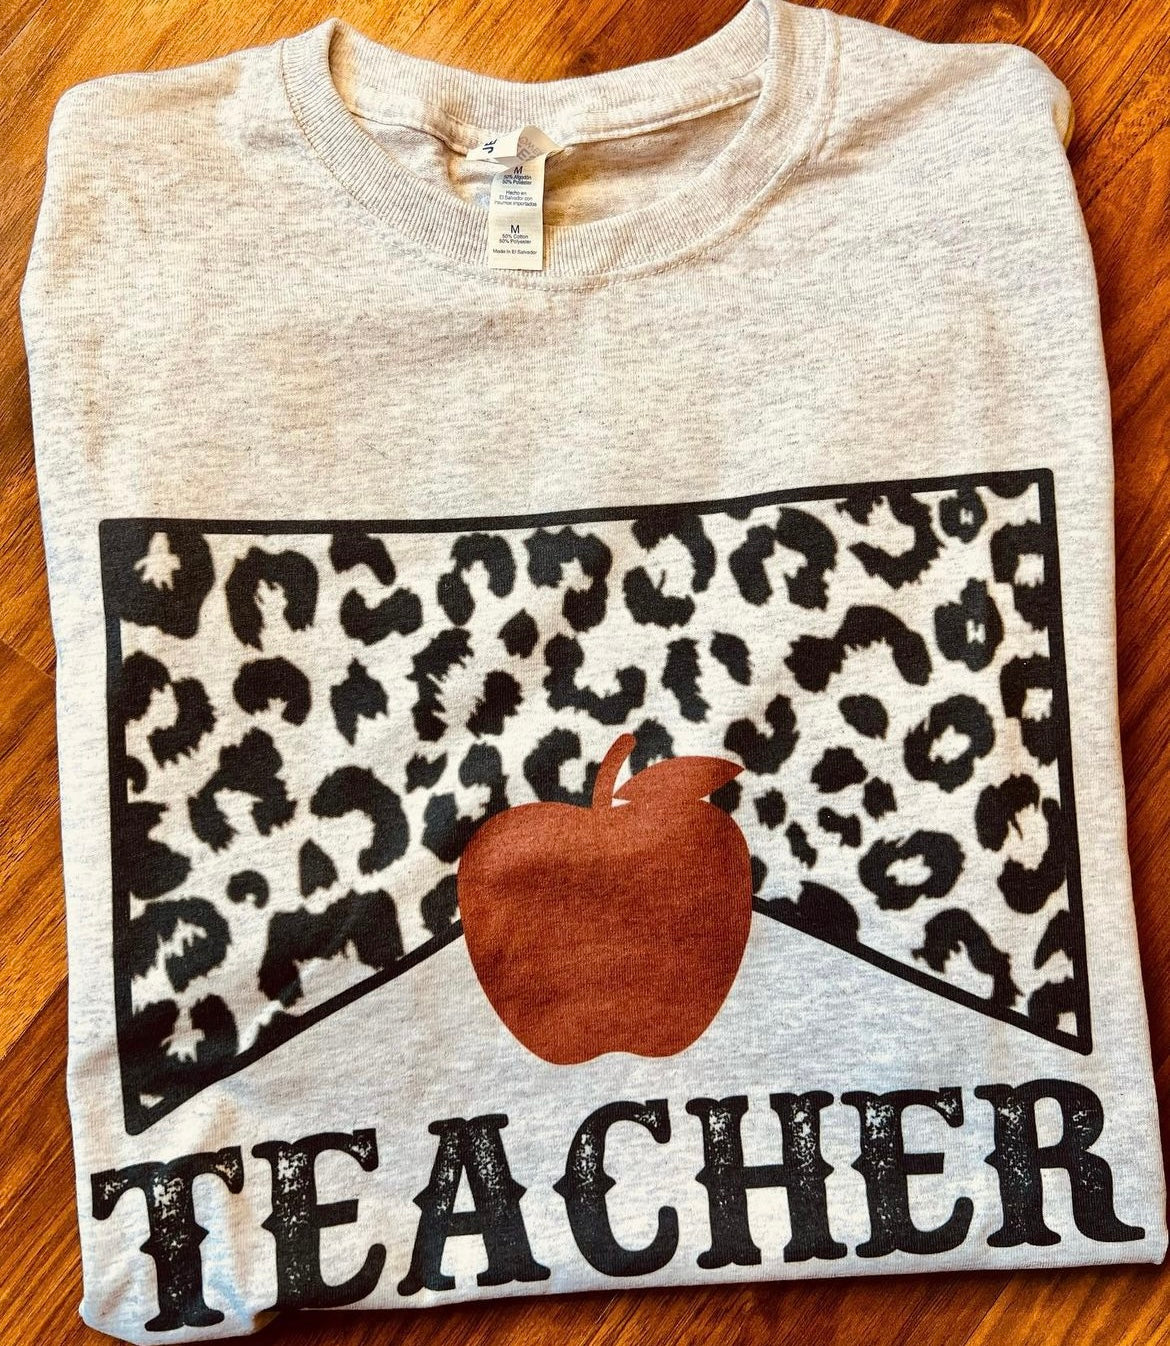 Teacher Collection – All Cotton Blossom Creations